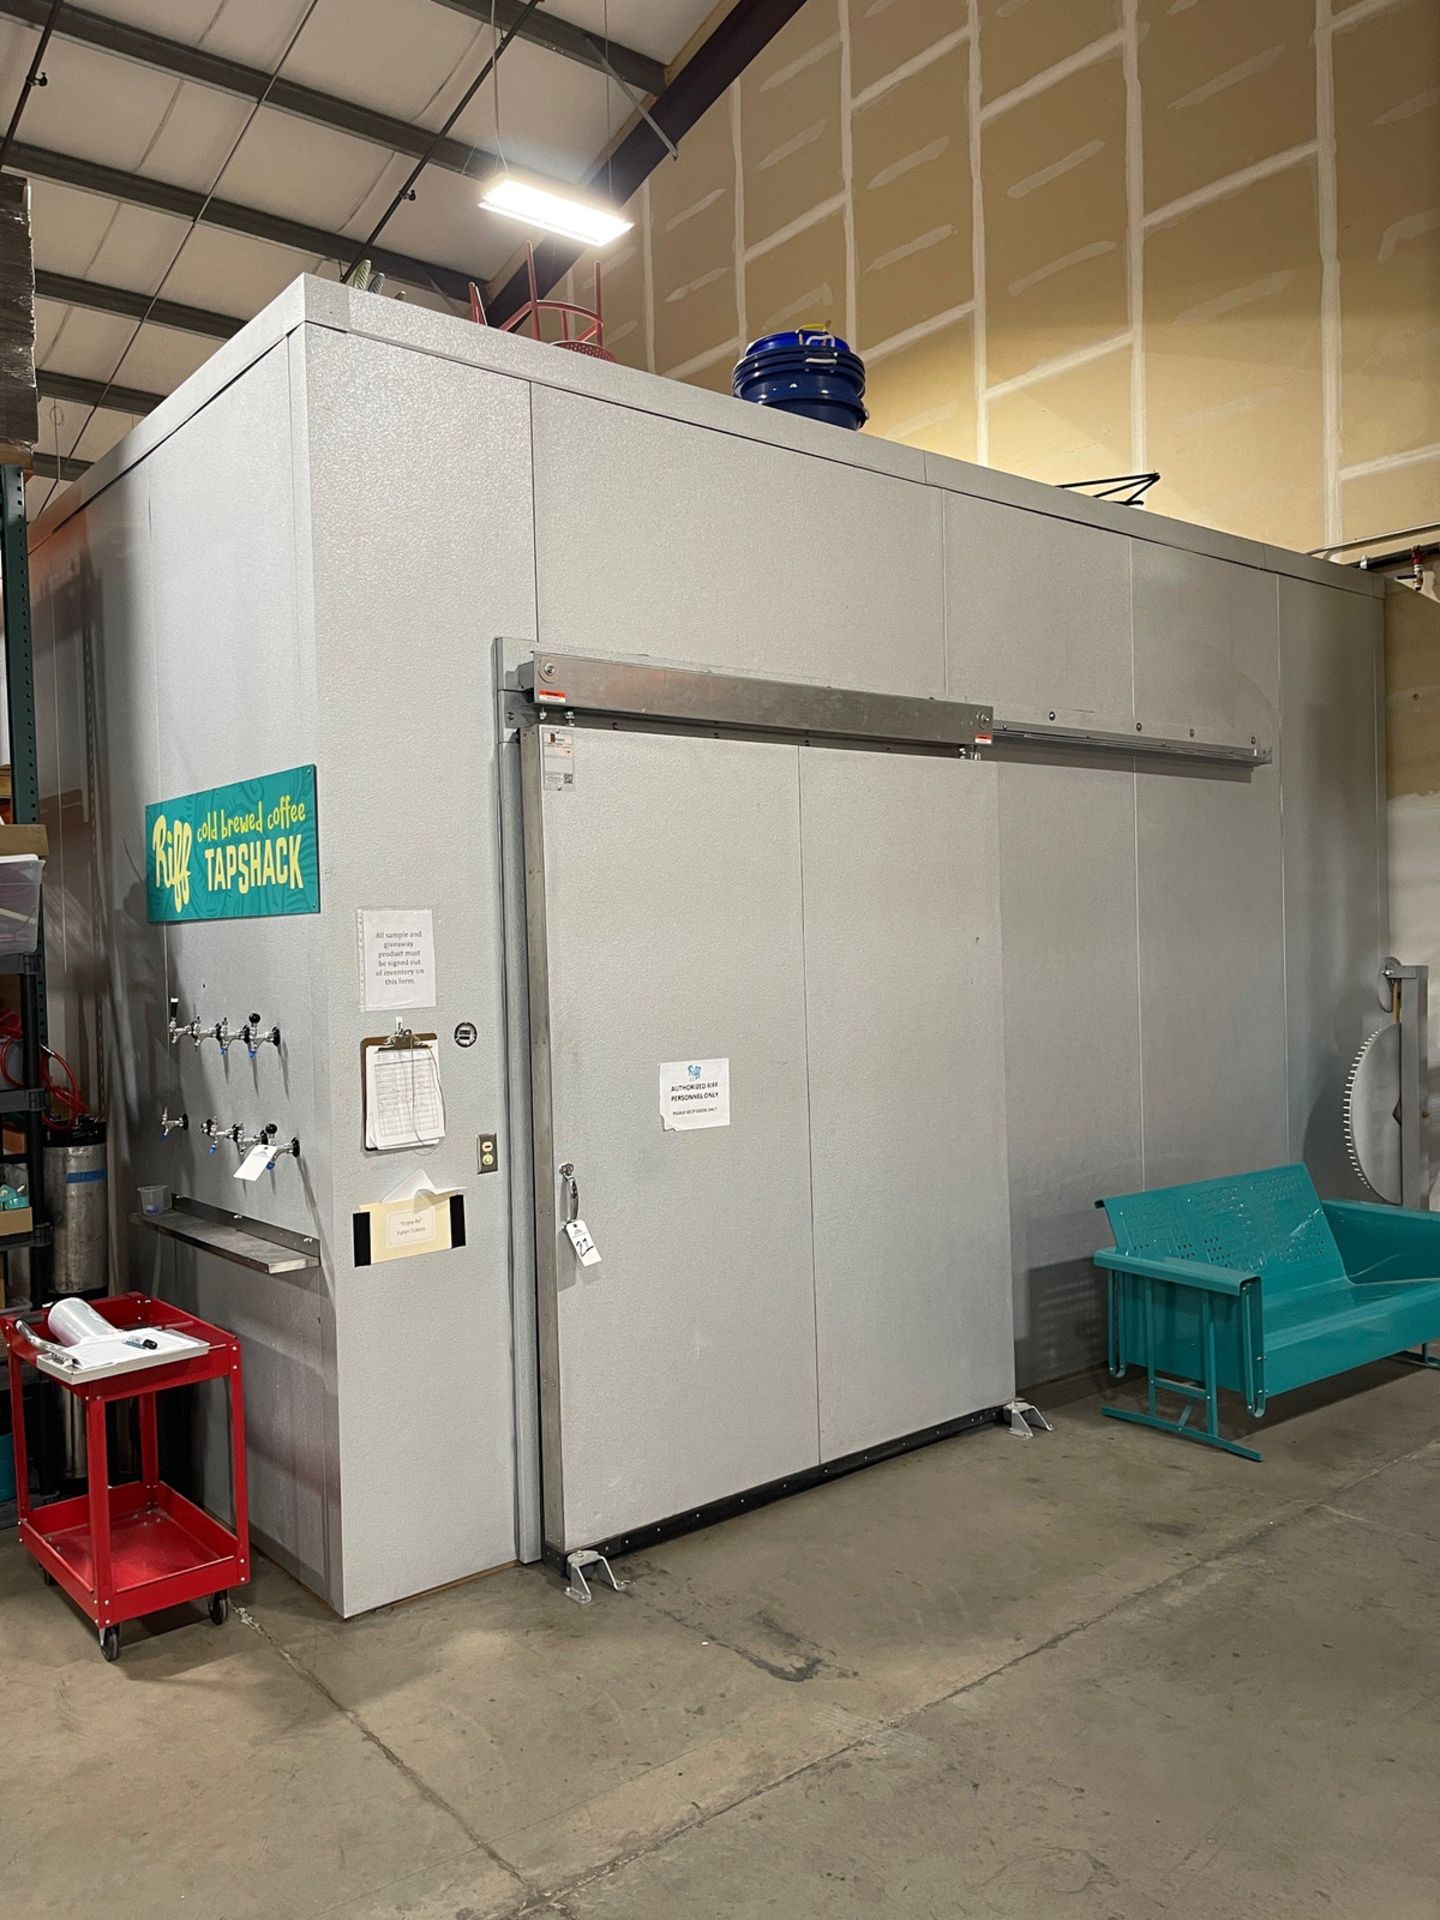 2018 Thermal Supply Cold Room with Glycol Chilled Fans, 20' x 35' x 12', LED Lights | Rig Fee $7780